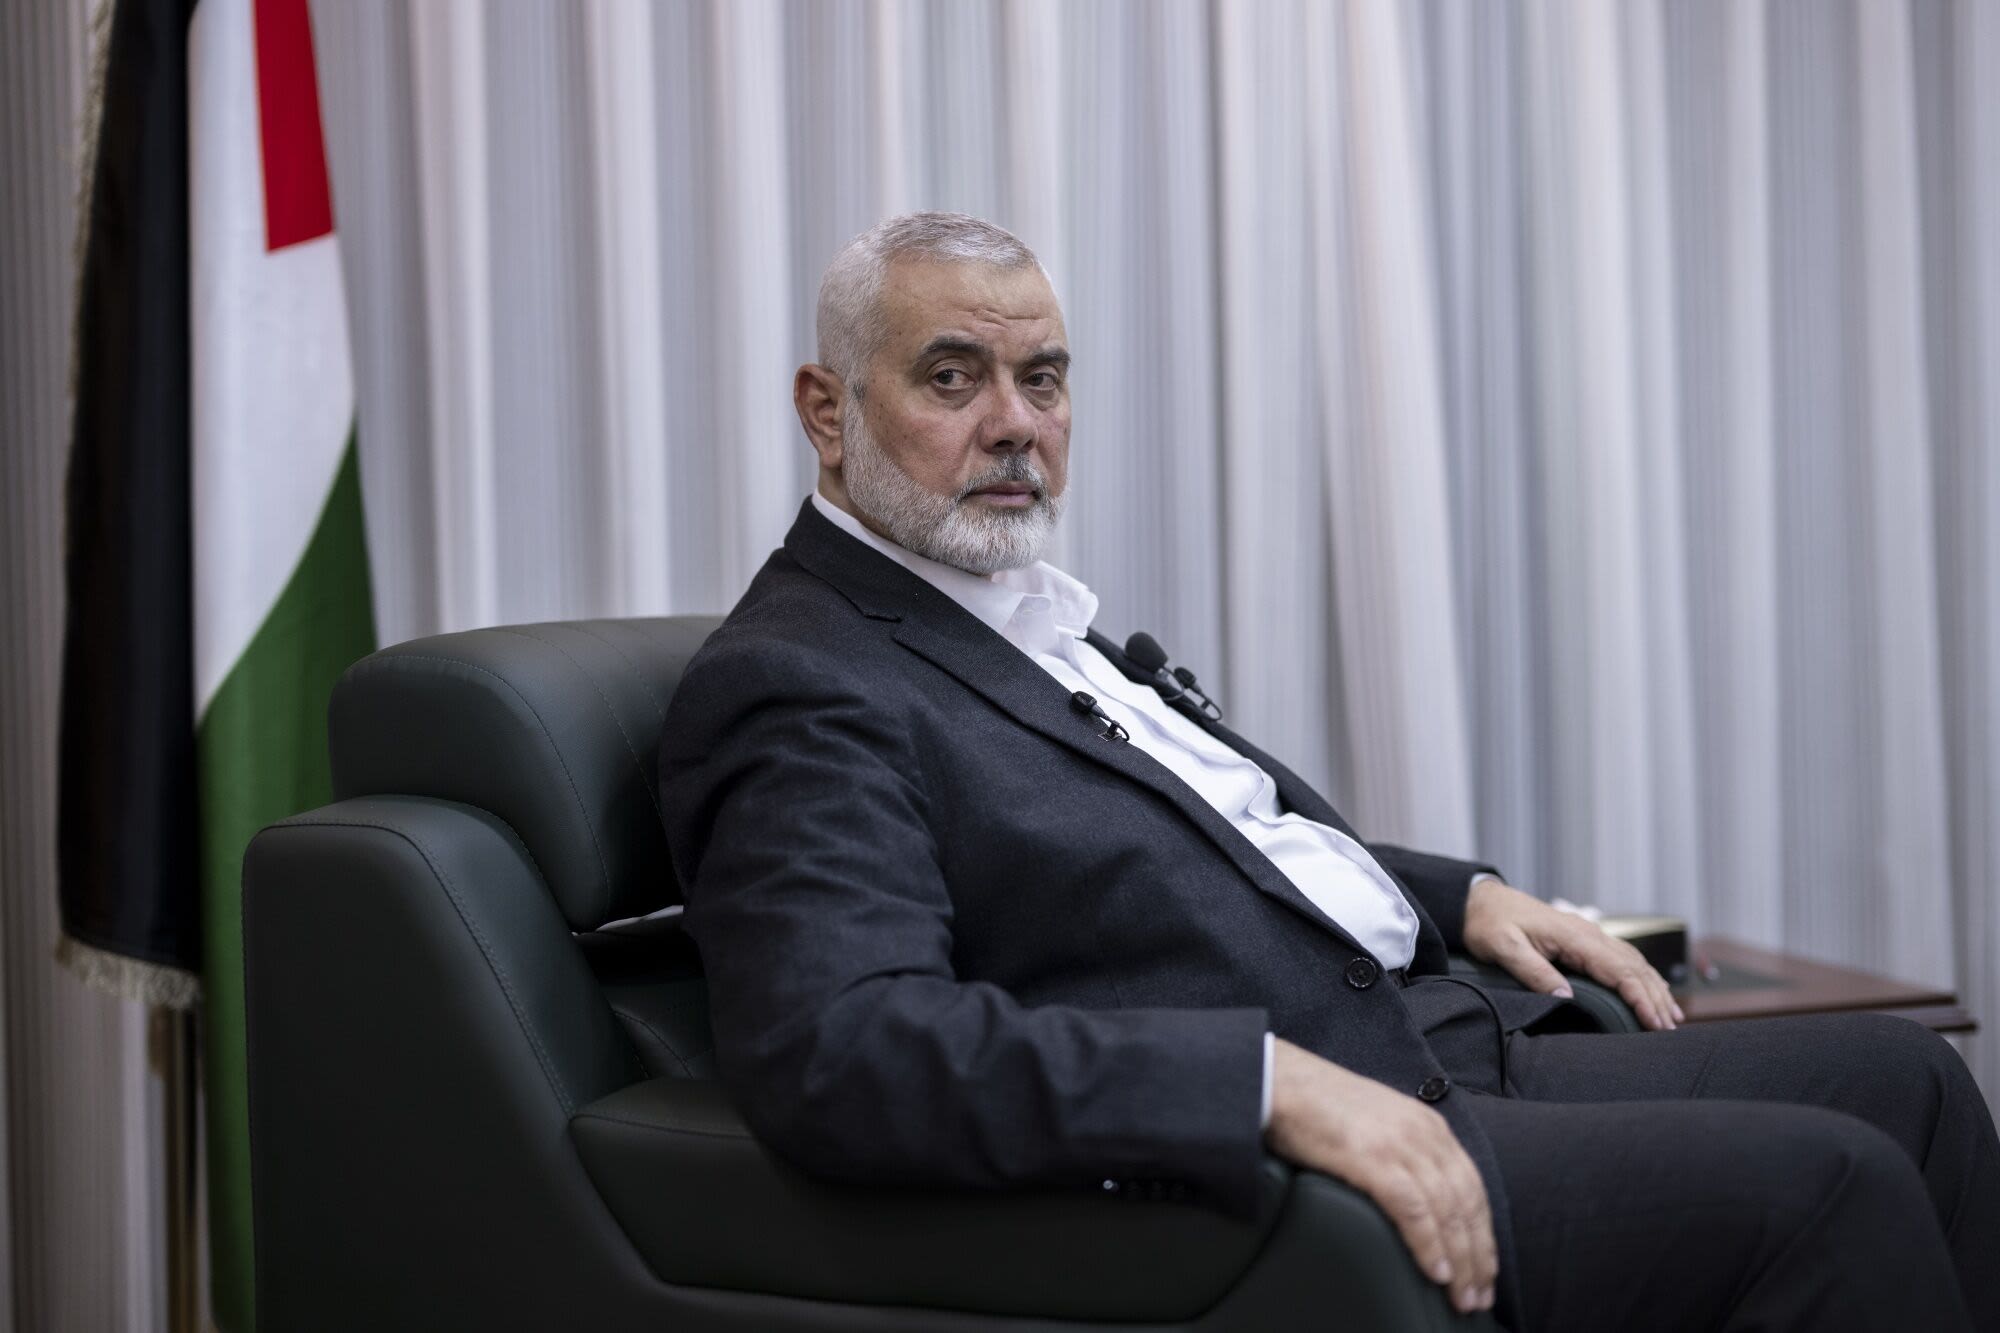 Hamas Says Israel Killed Political Leader With Airstrike in Iran